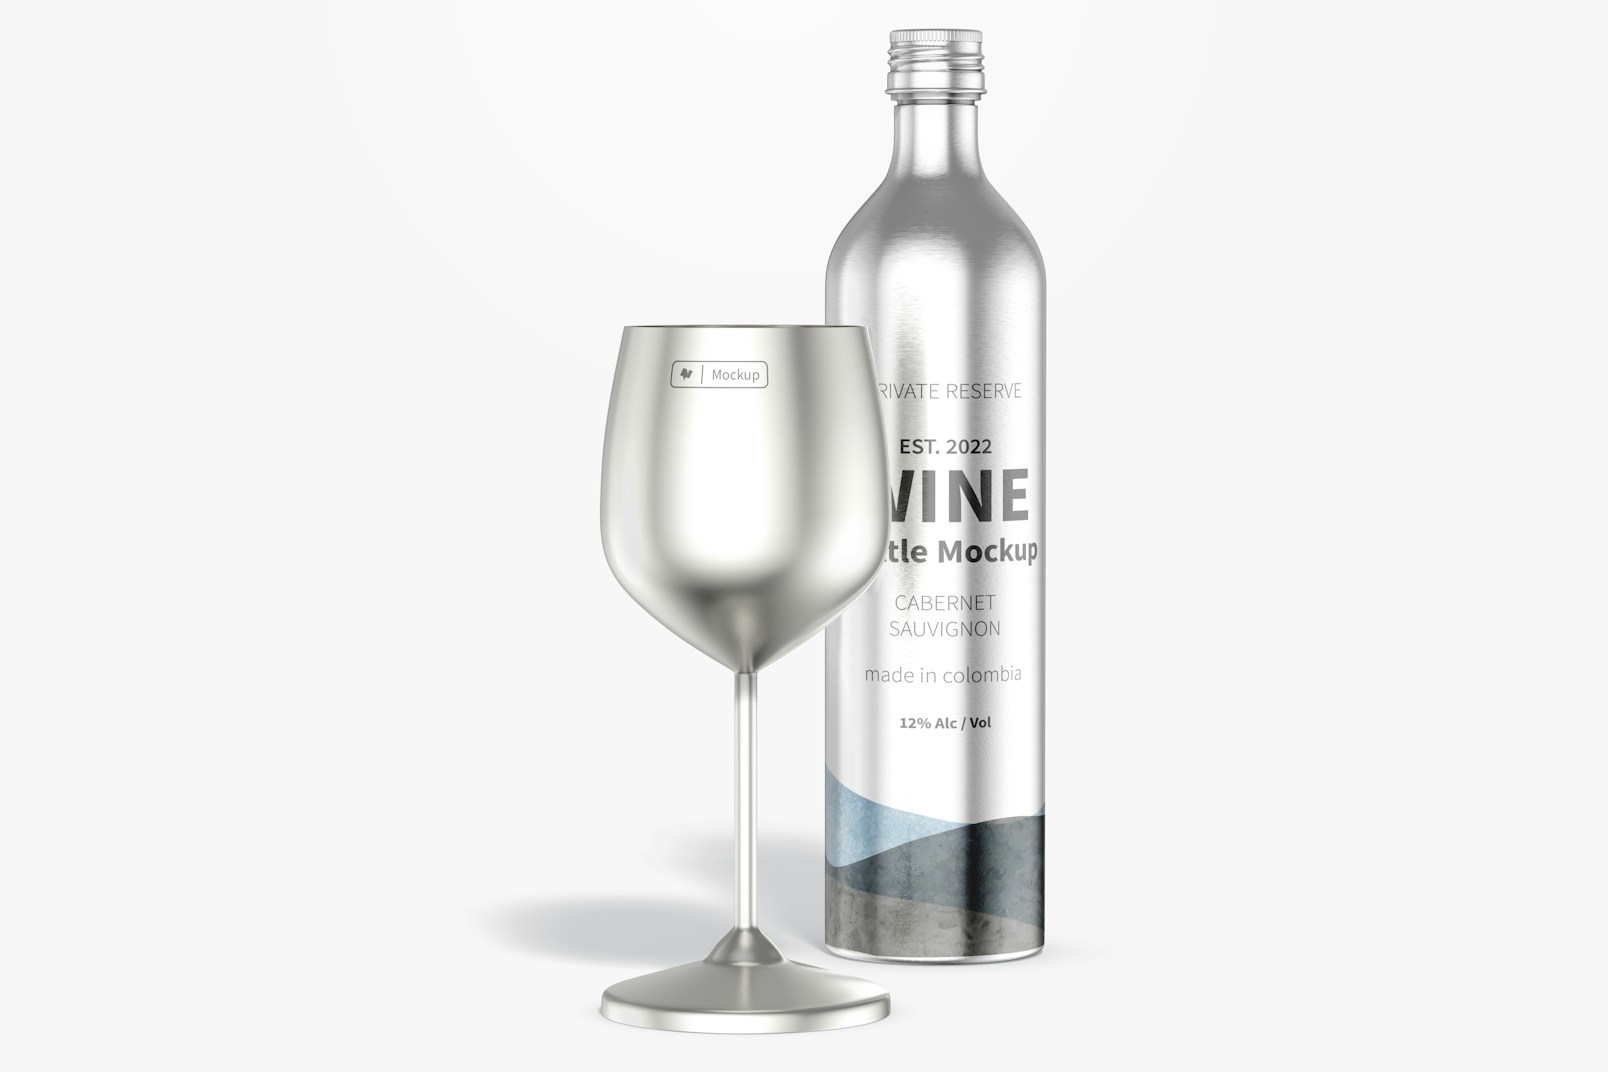 Stainless Steel Wine Glass with Bottle Mockup